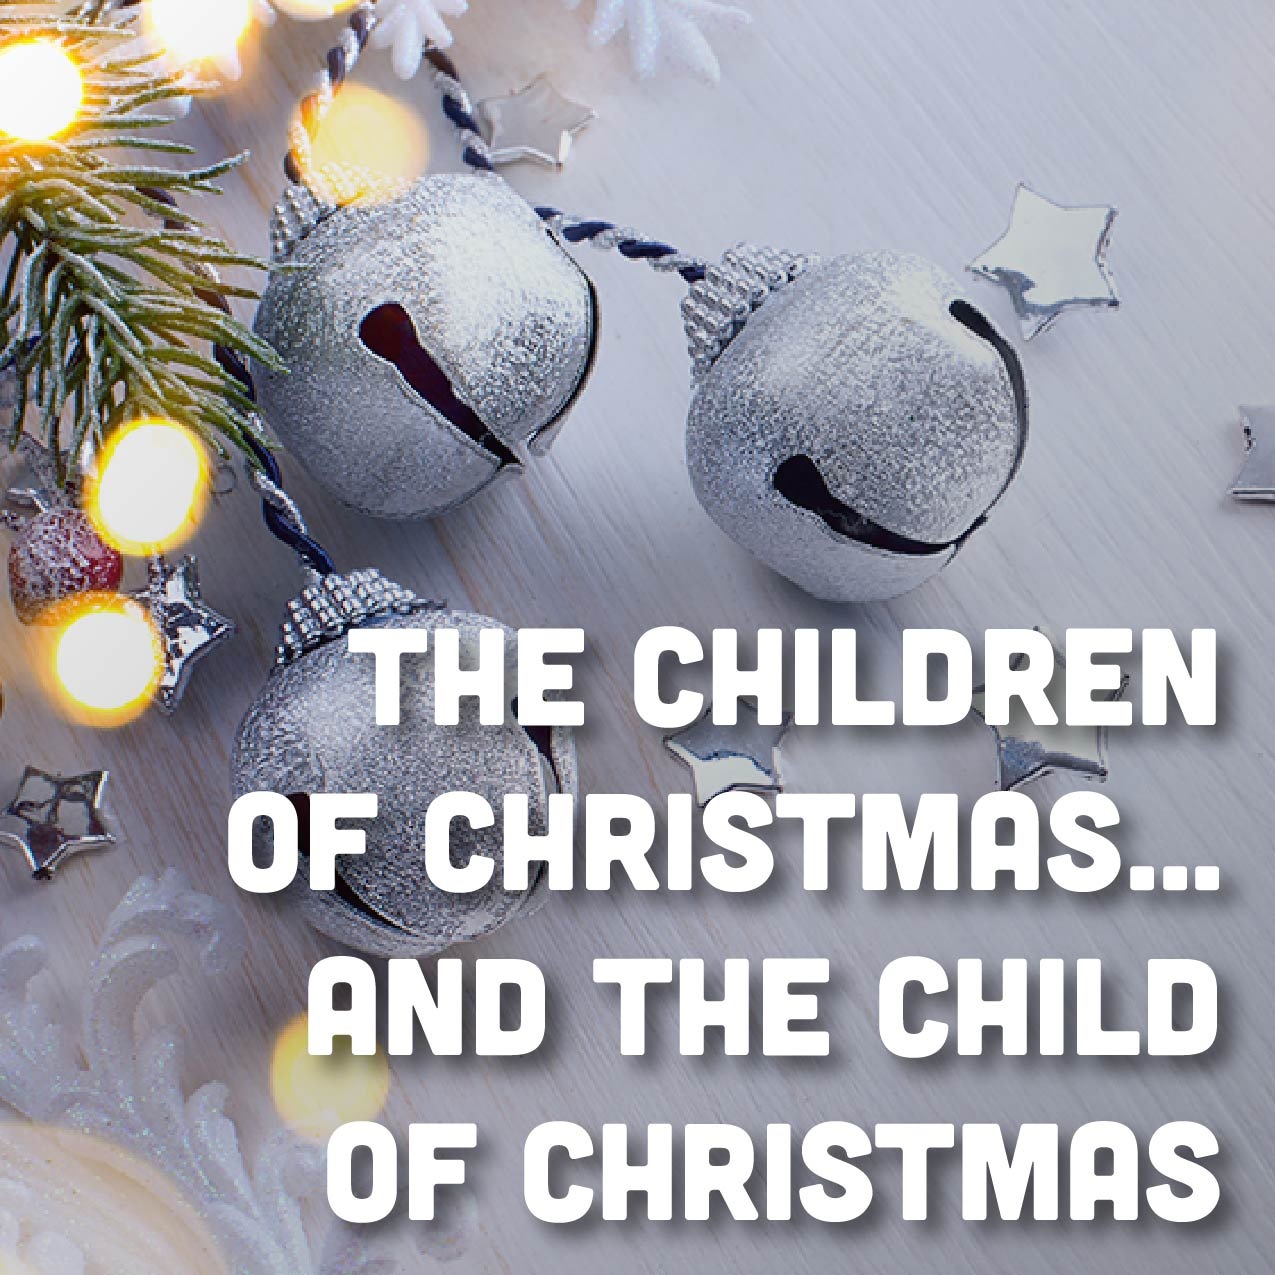 The Children of Christmas… And The Child of Christmas